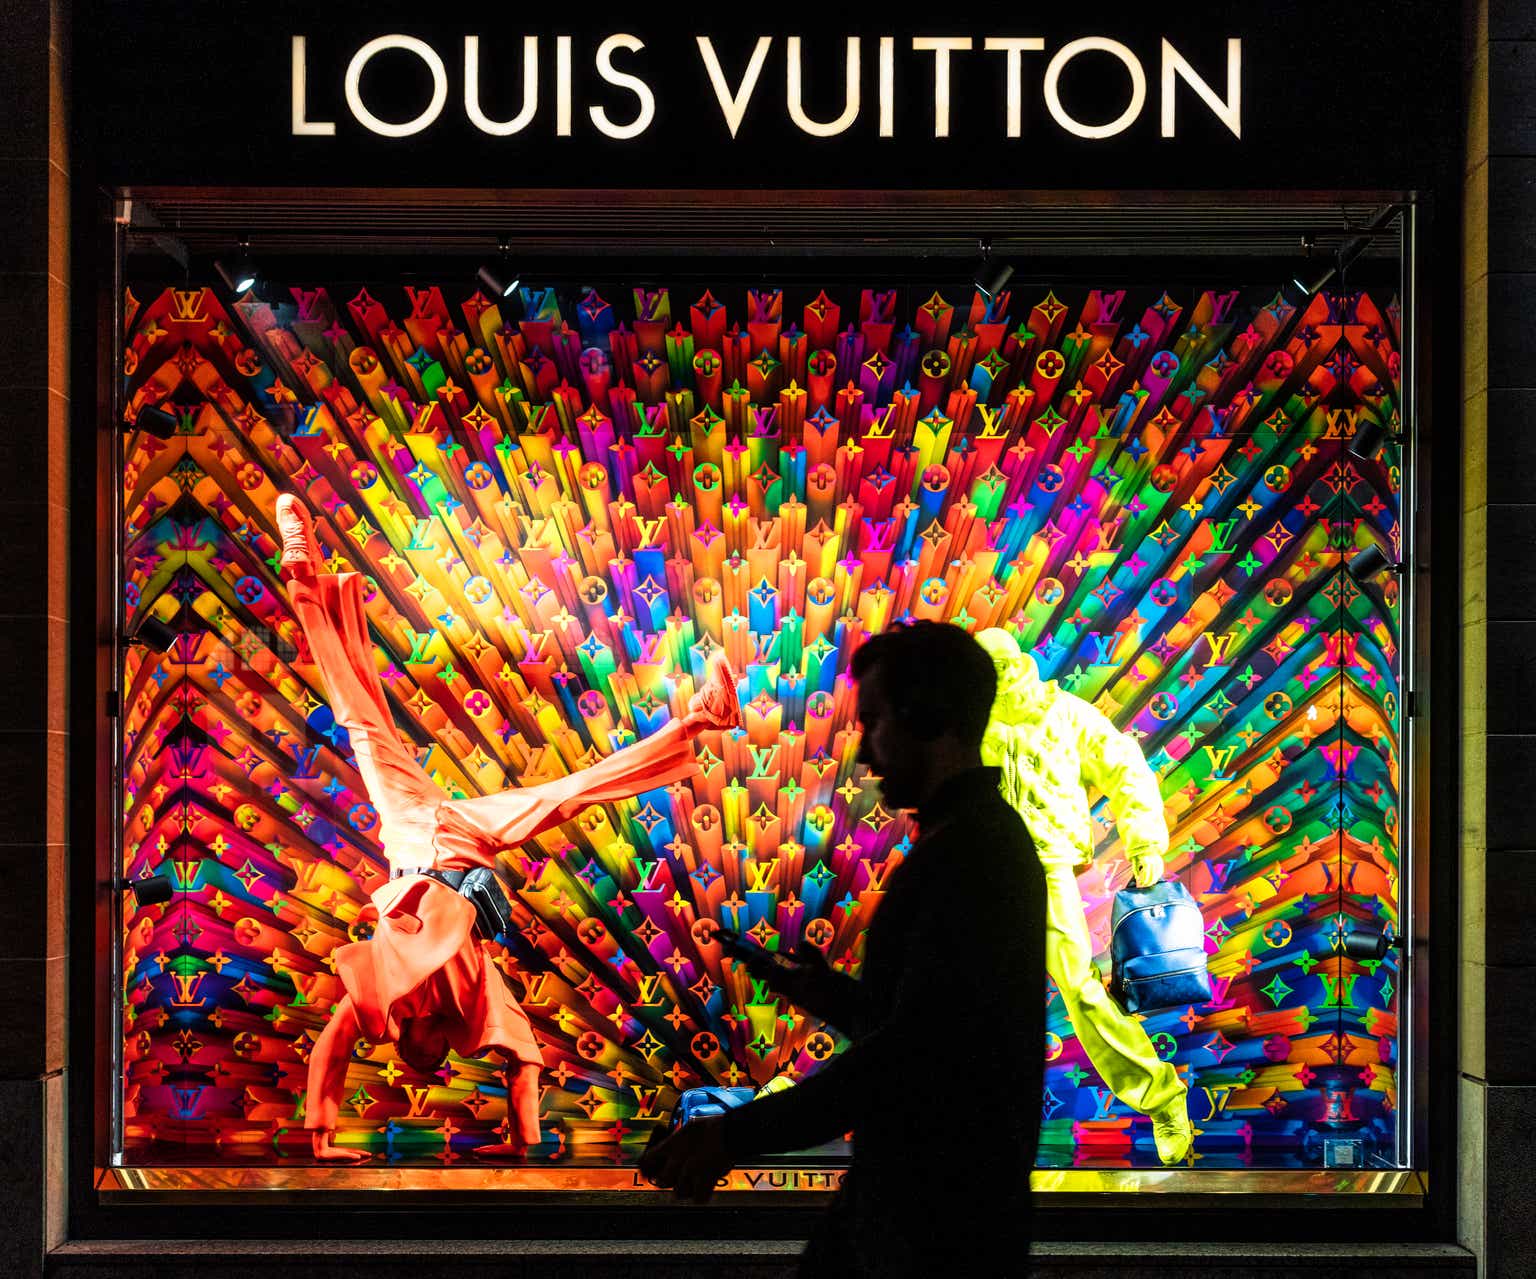 LVMH Moët Hennessy Louis Vuitton SA, French company